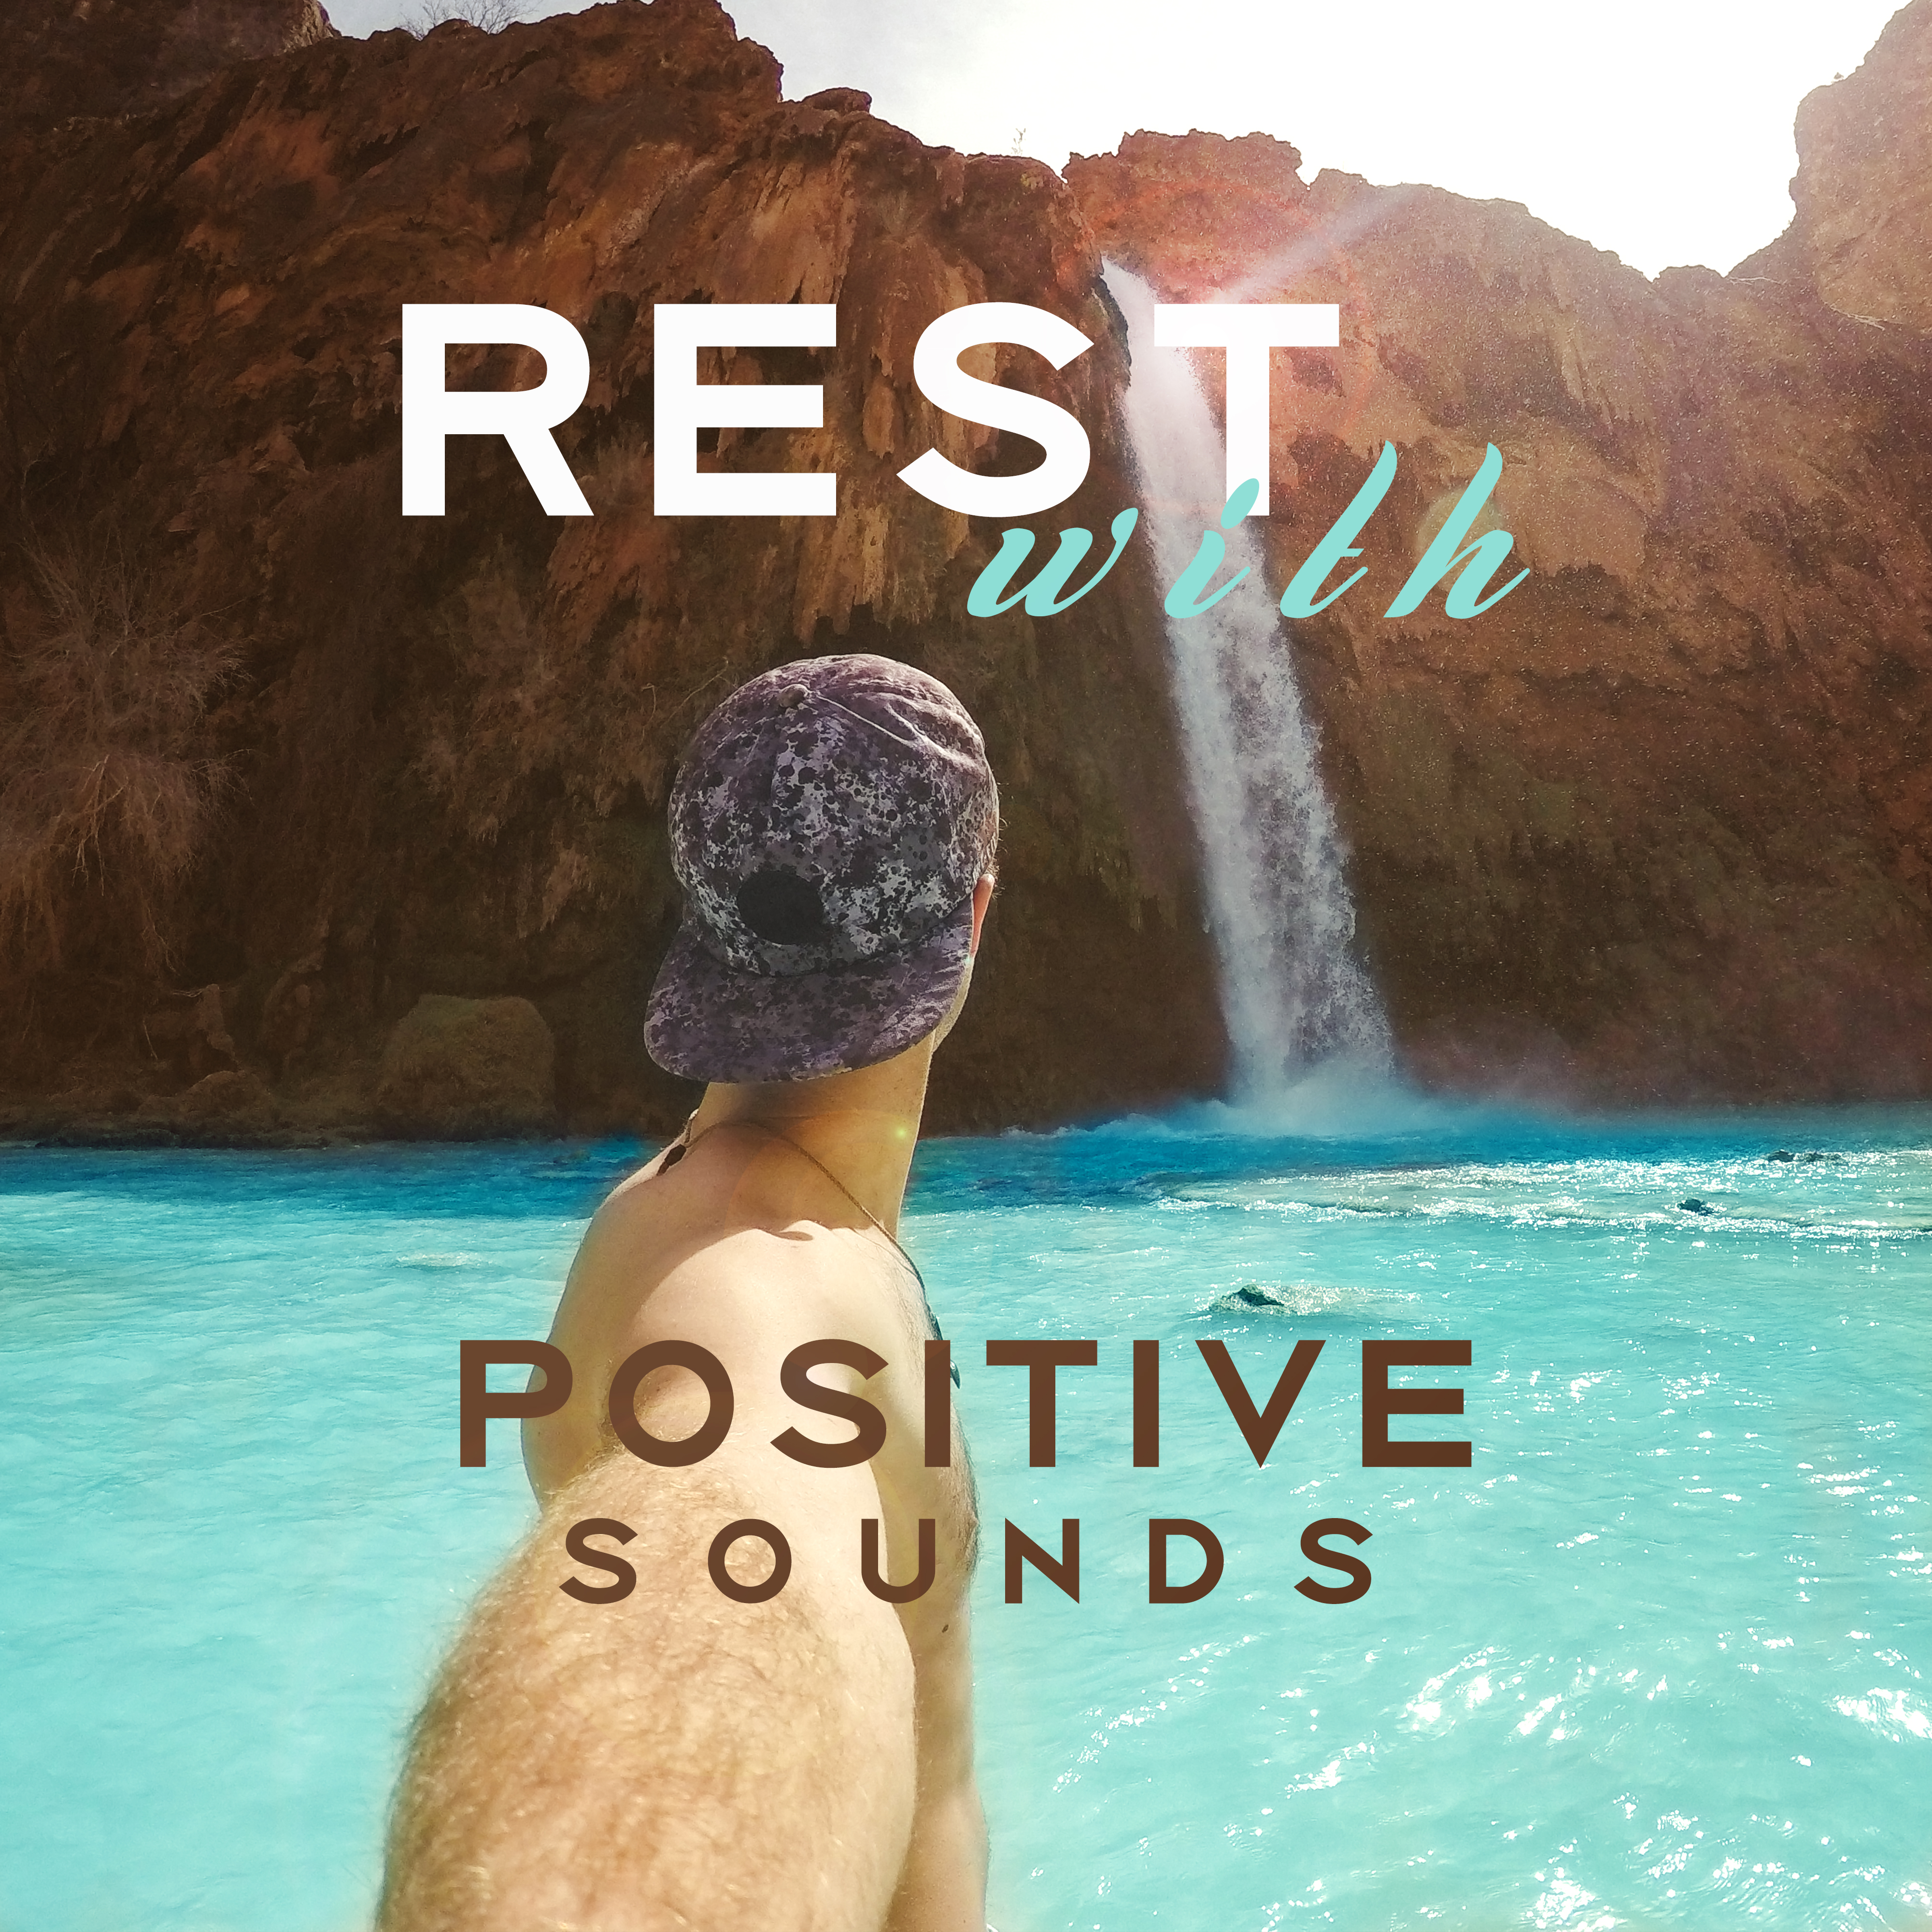 Rest with Positive Sounds  New Age Relaxing Music, Sounds to Rest, Mind Relaxation, Peaceful Waves